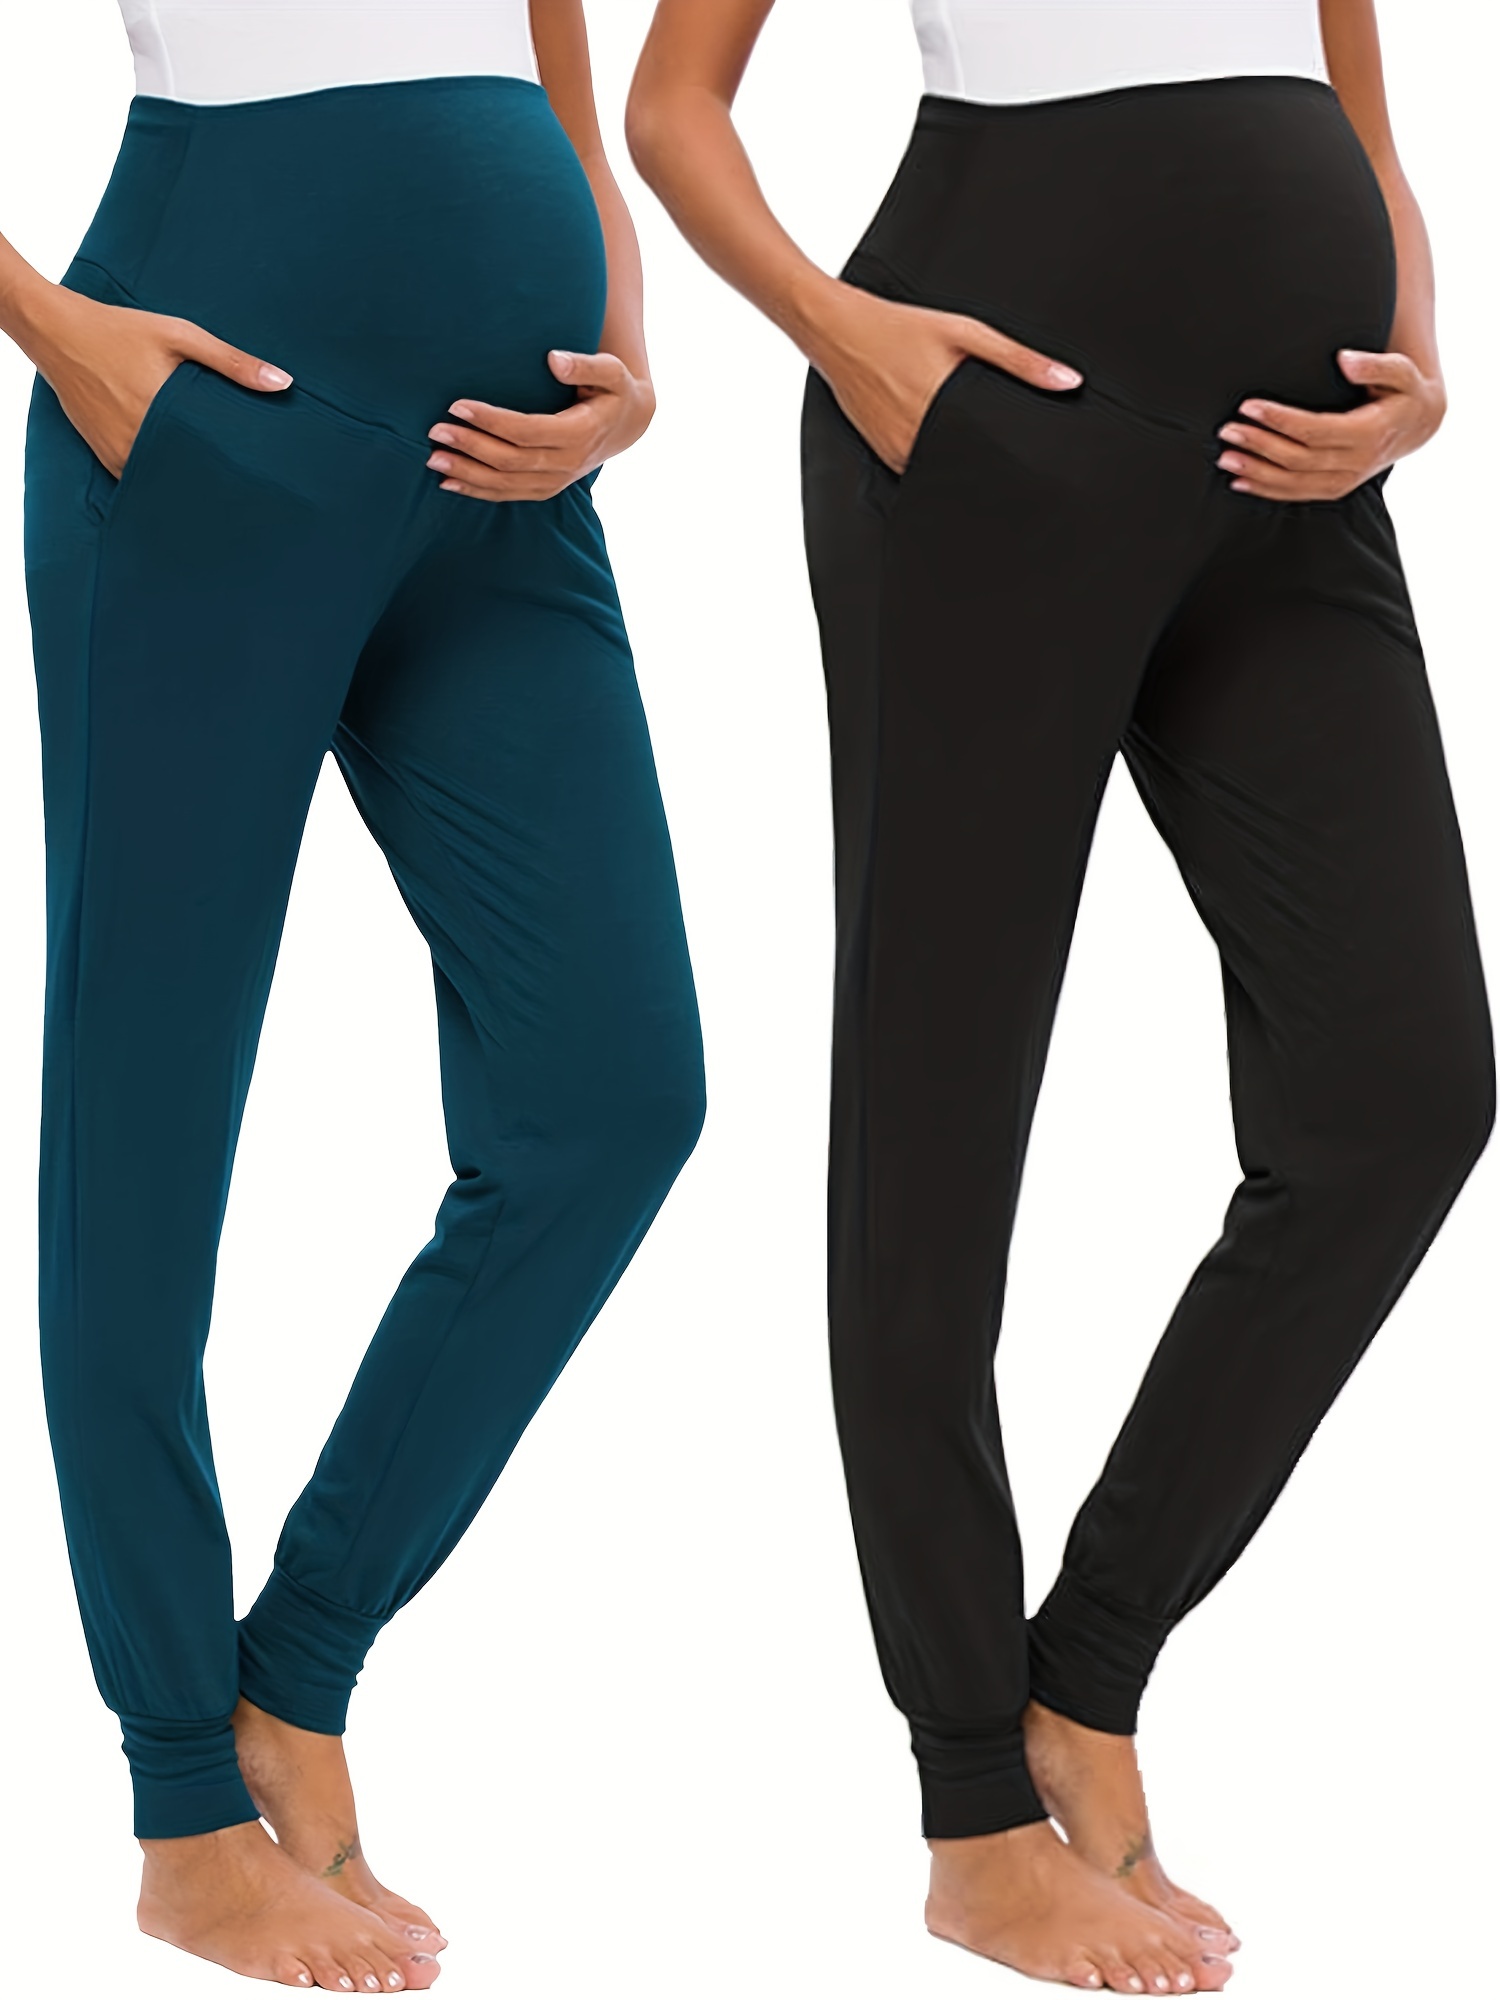 IUGA Maternity Pants for Work Over The Belly with Pockets